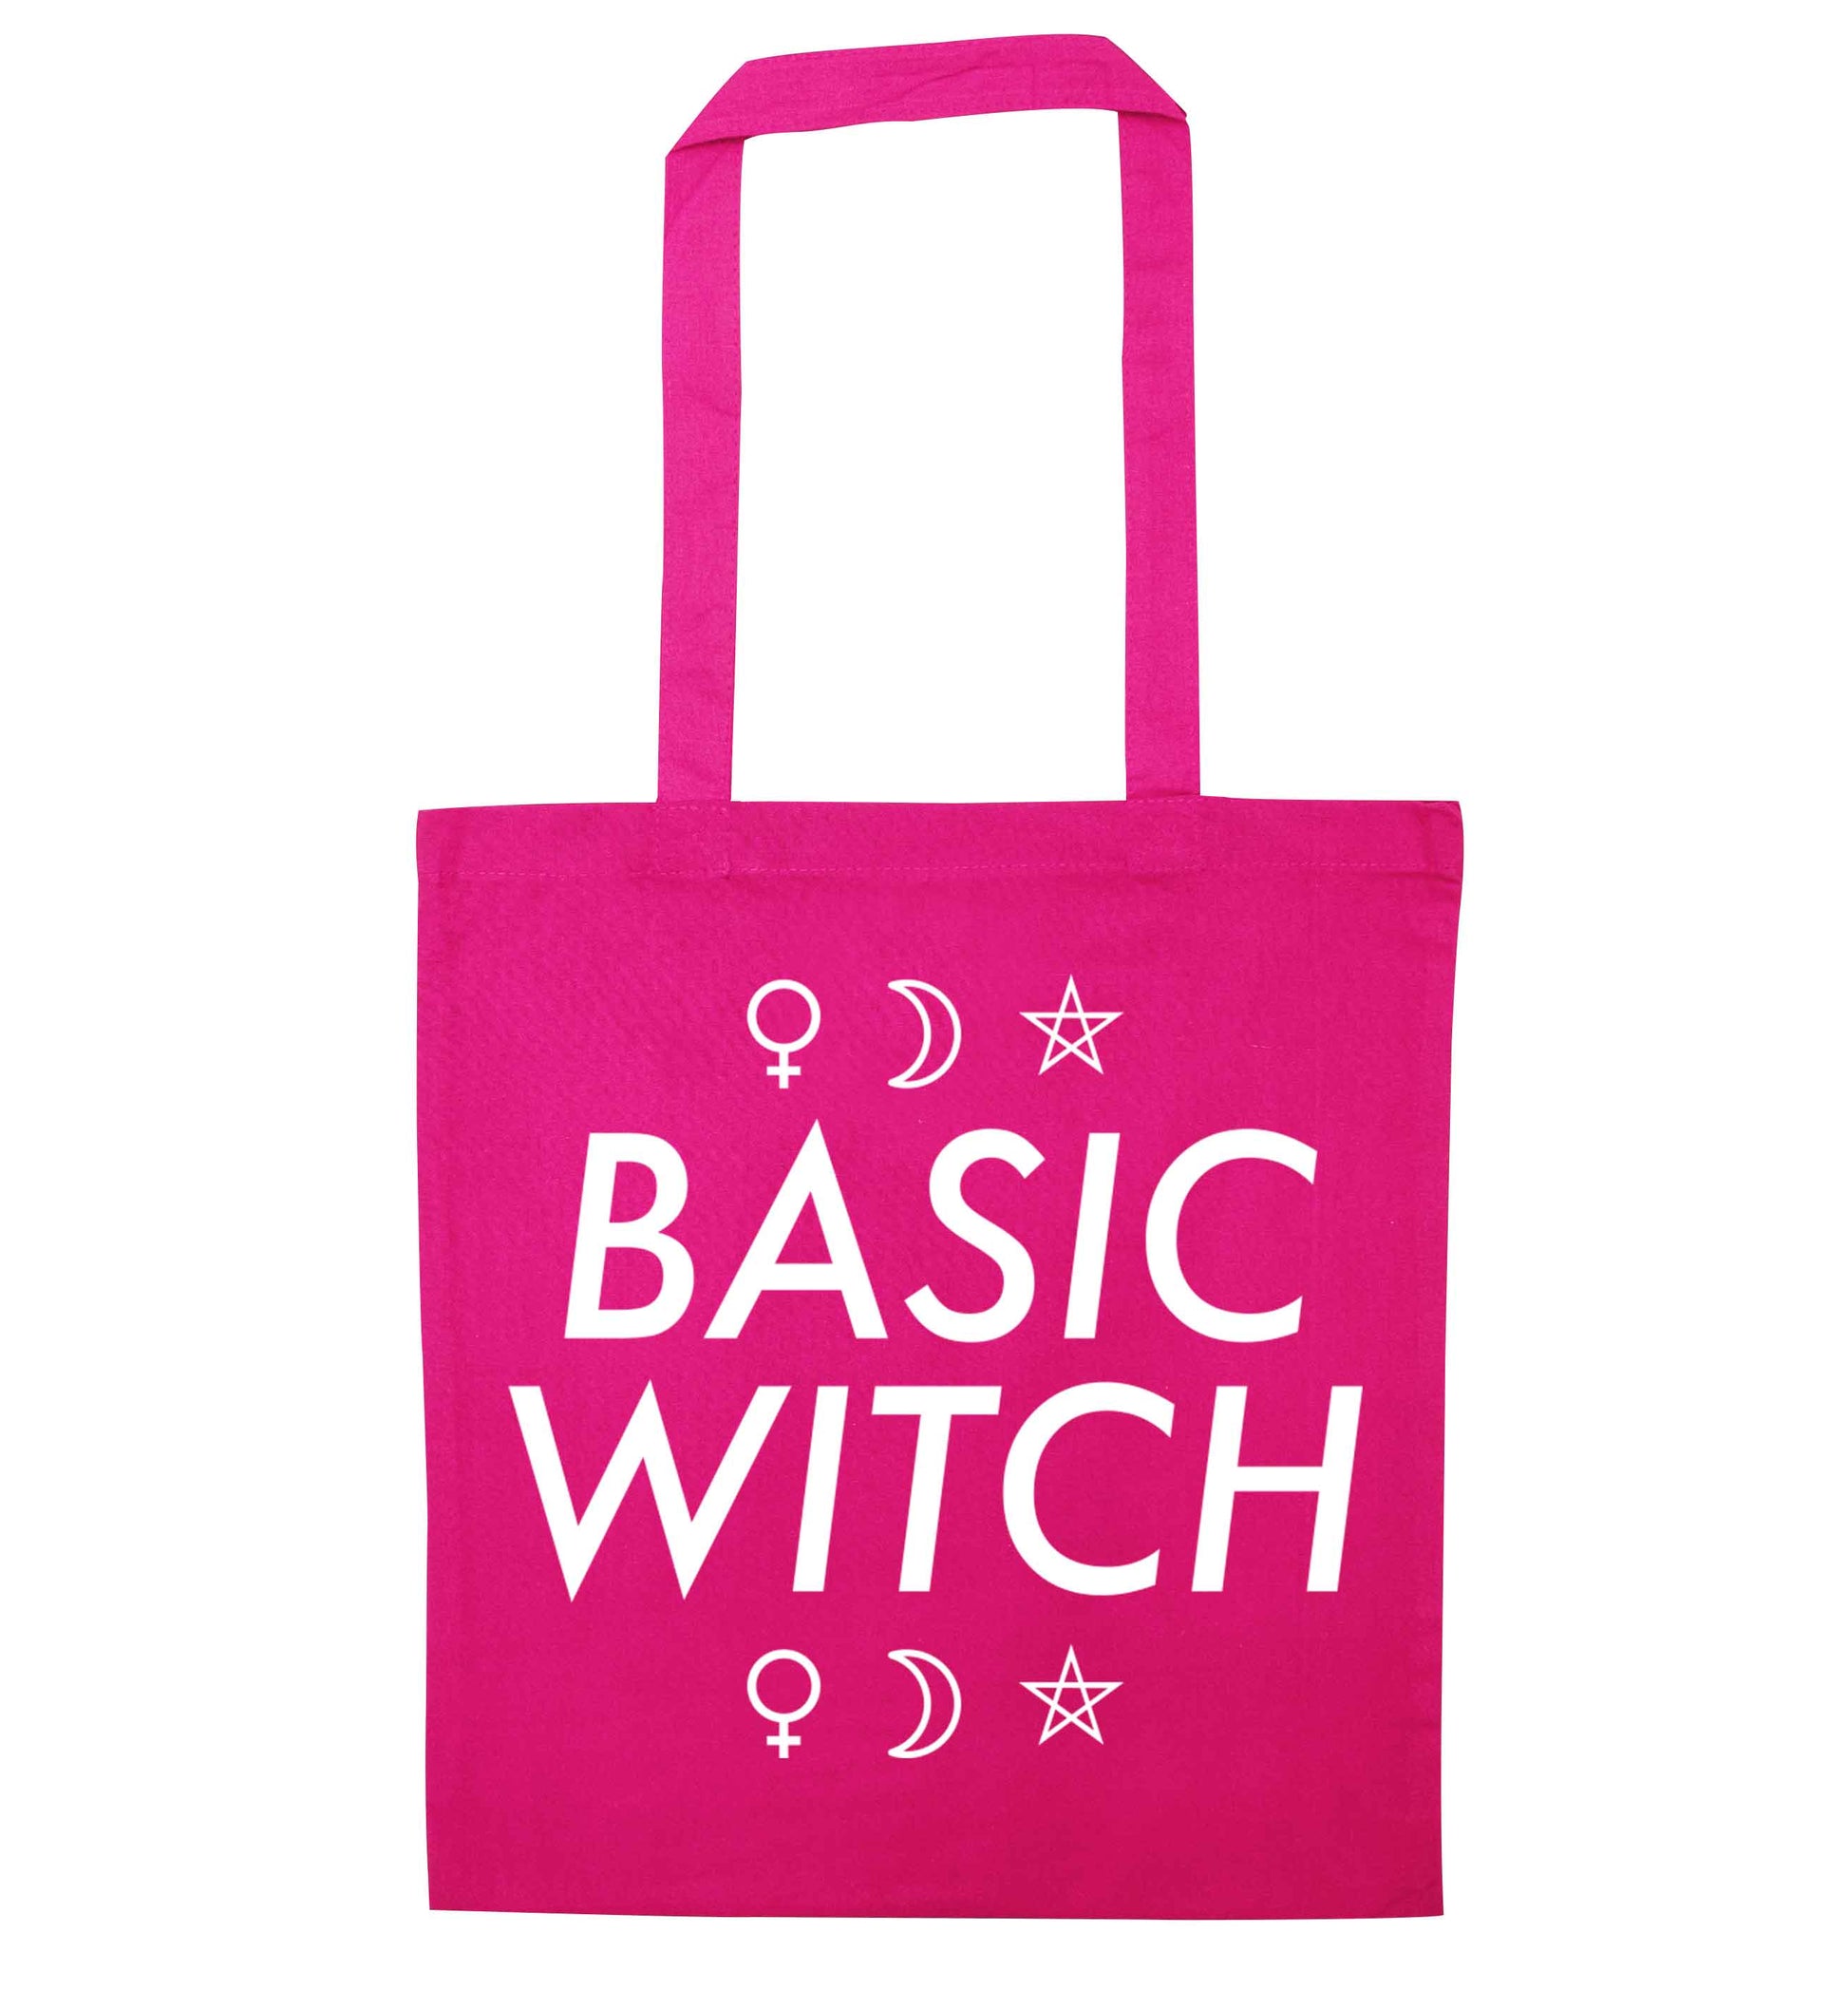 Basic witch 1 pink tote bag